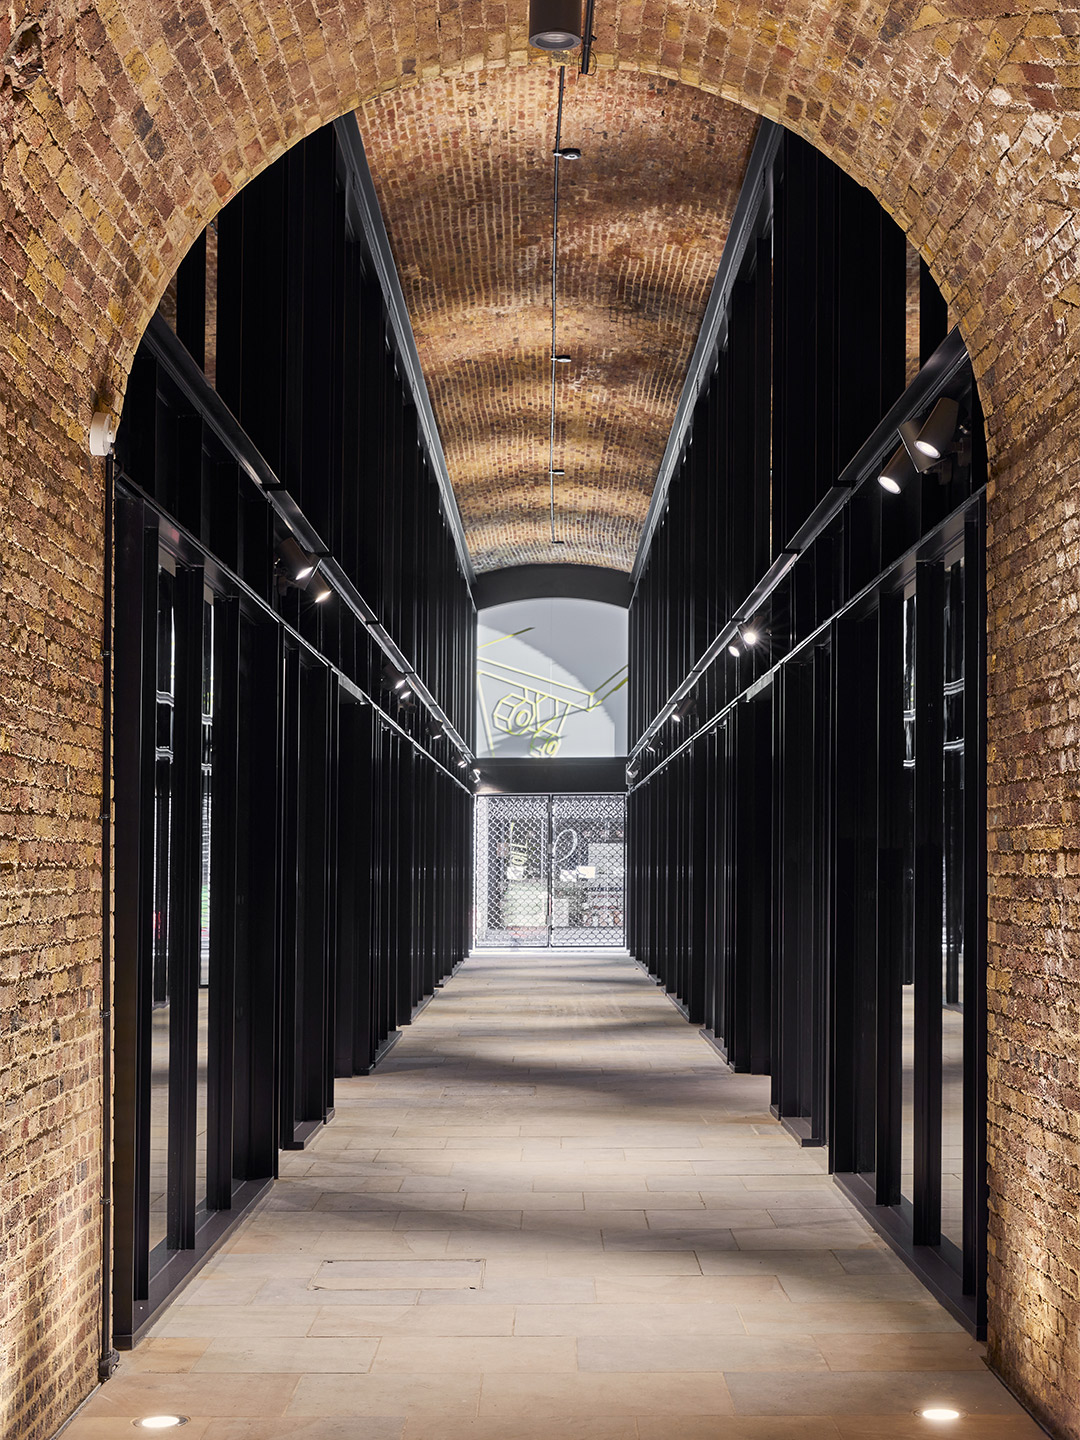 First look: Borough Yards in London prepares to welcome visitors 